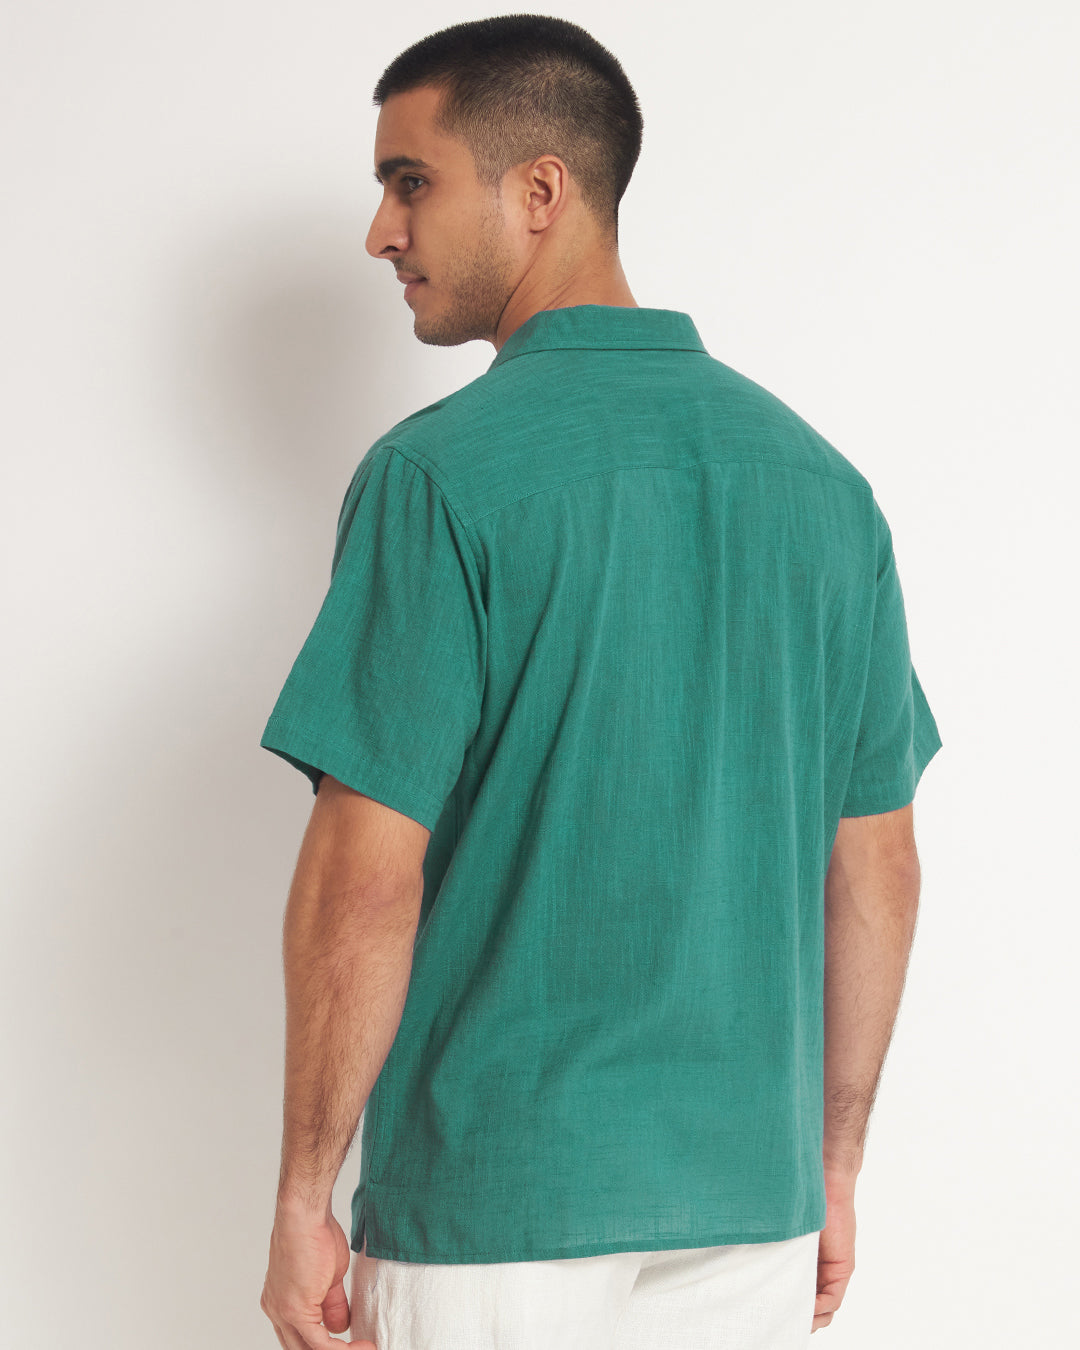 Classic Forest Green Men's Half Sleeves Shirt